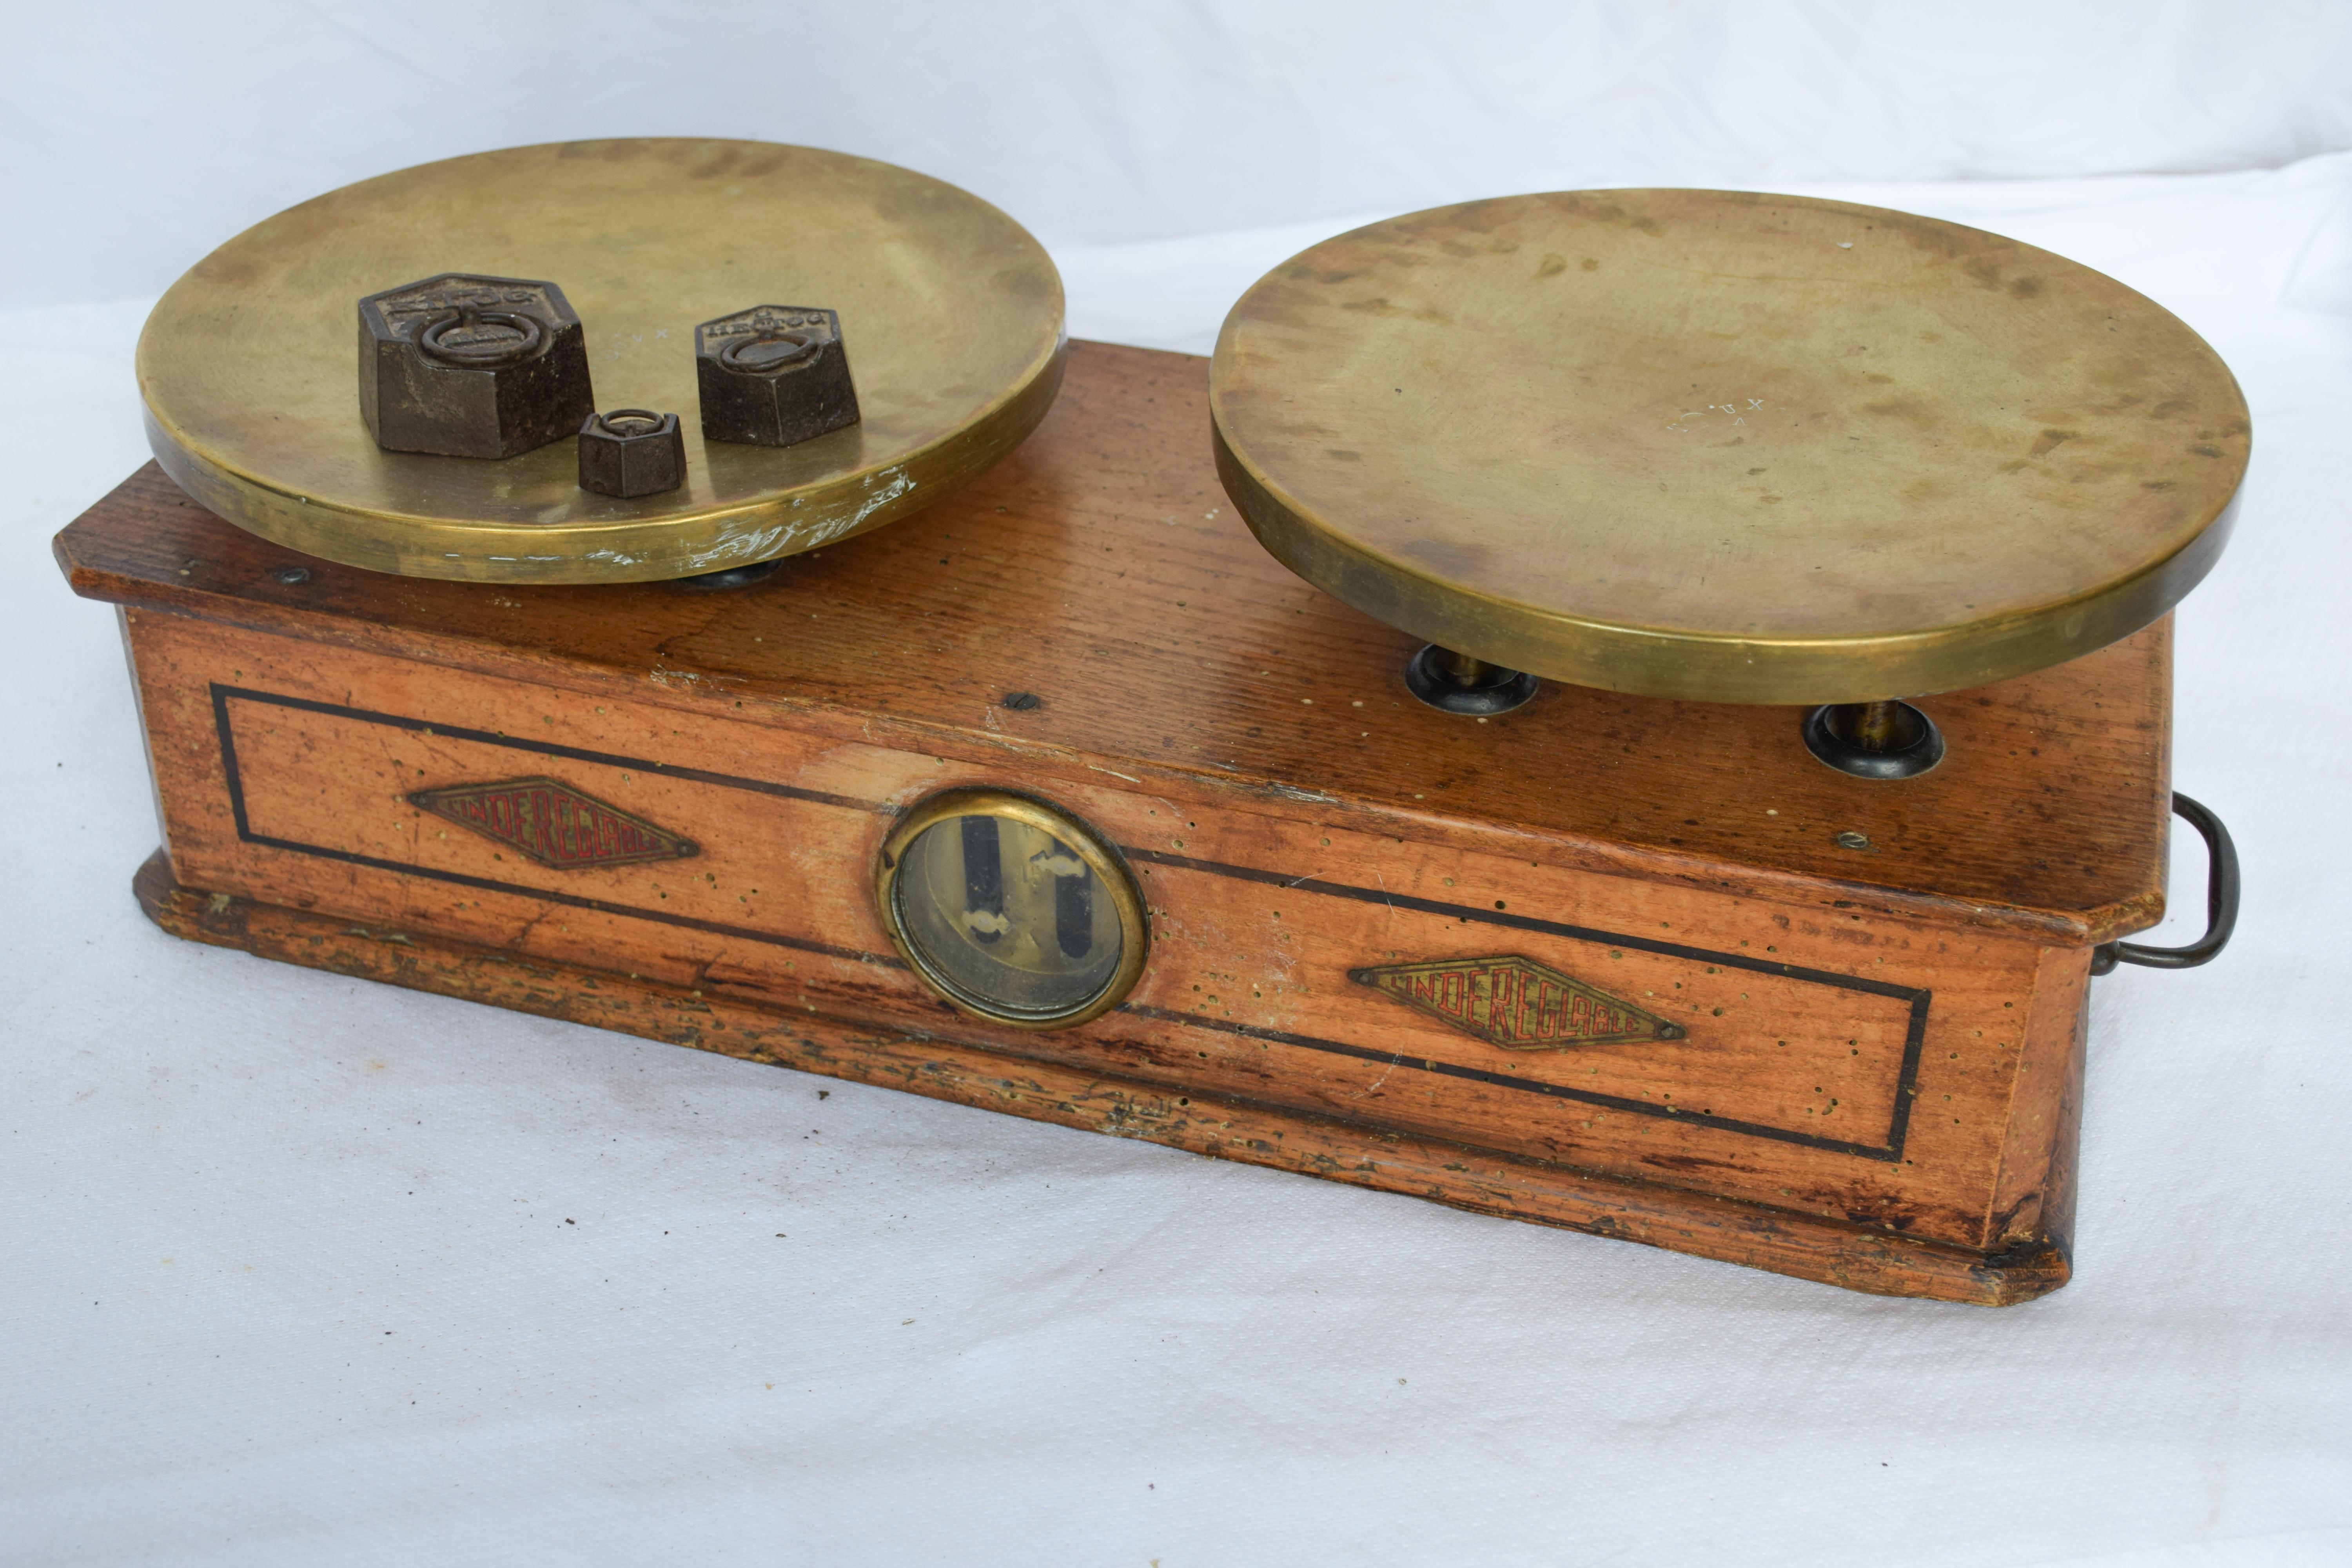 Antique two-plate scale, wood, copper and brass, early 1900s. This culinary scale comes with 3 weights. Very decorative for any kitchen decor.

Measures: 10